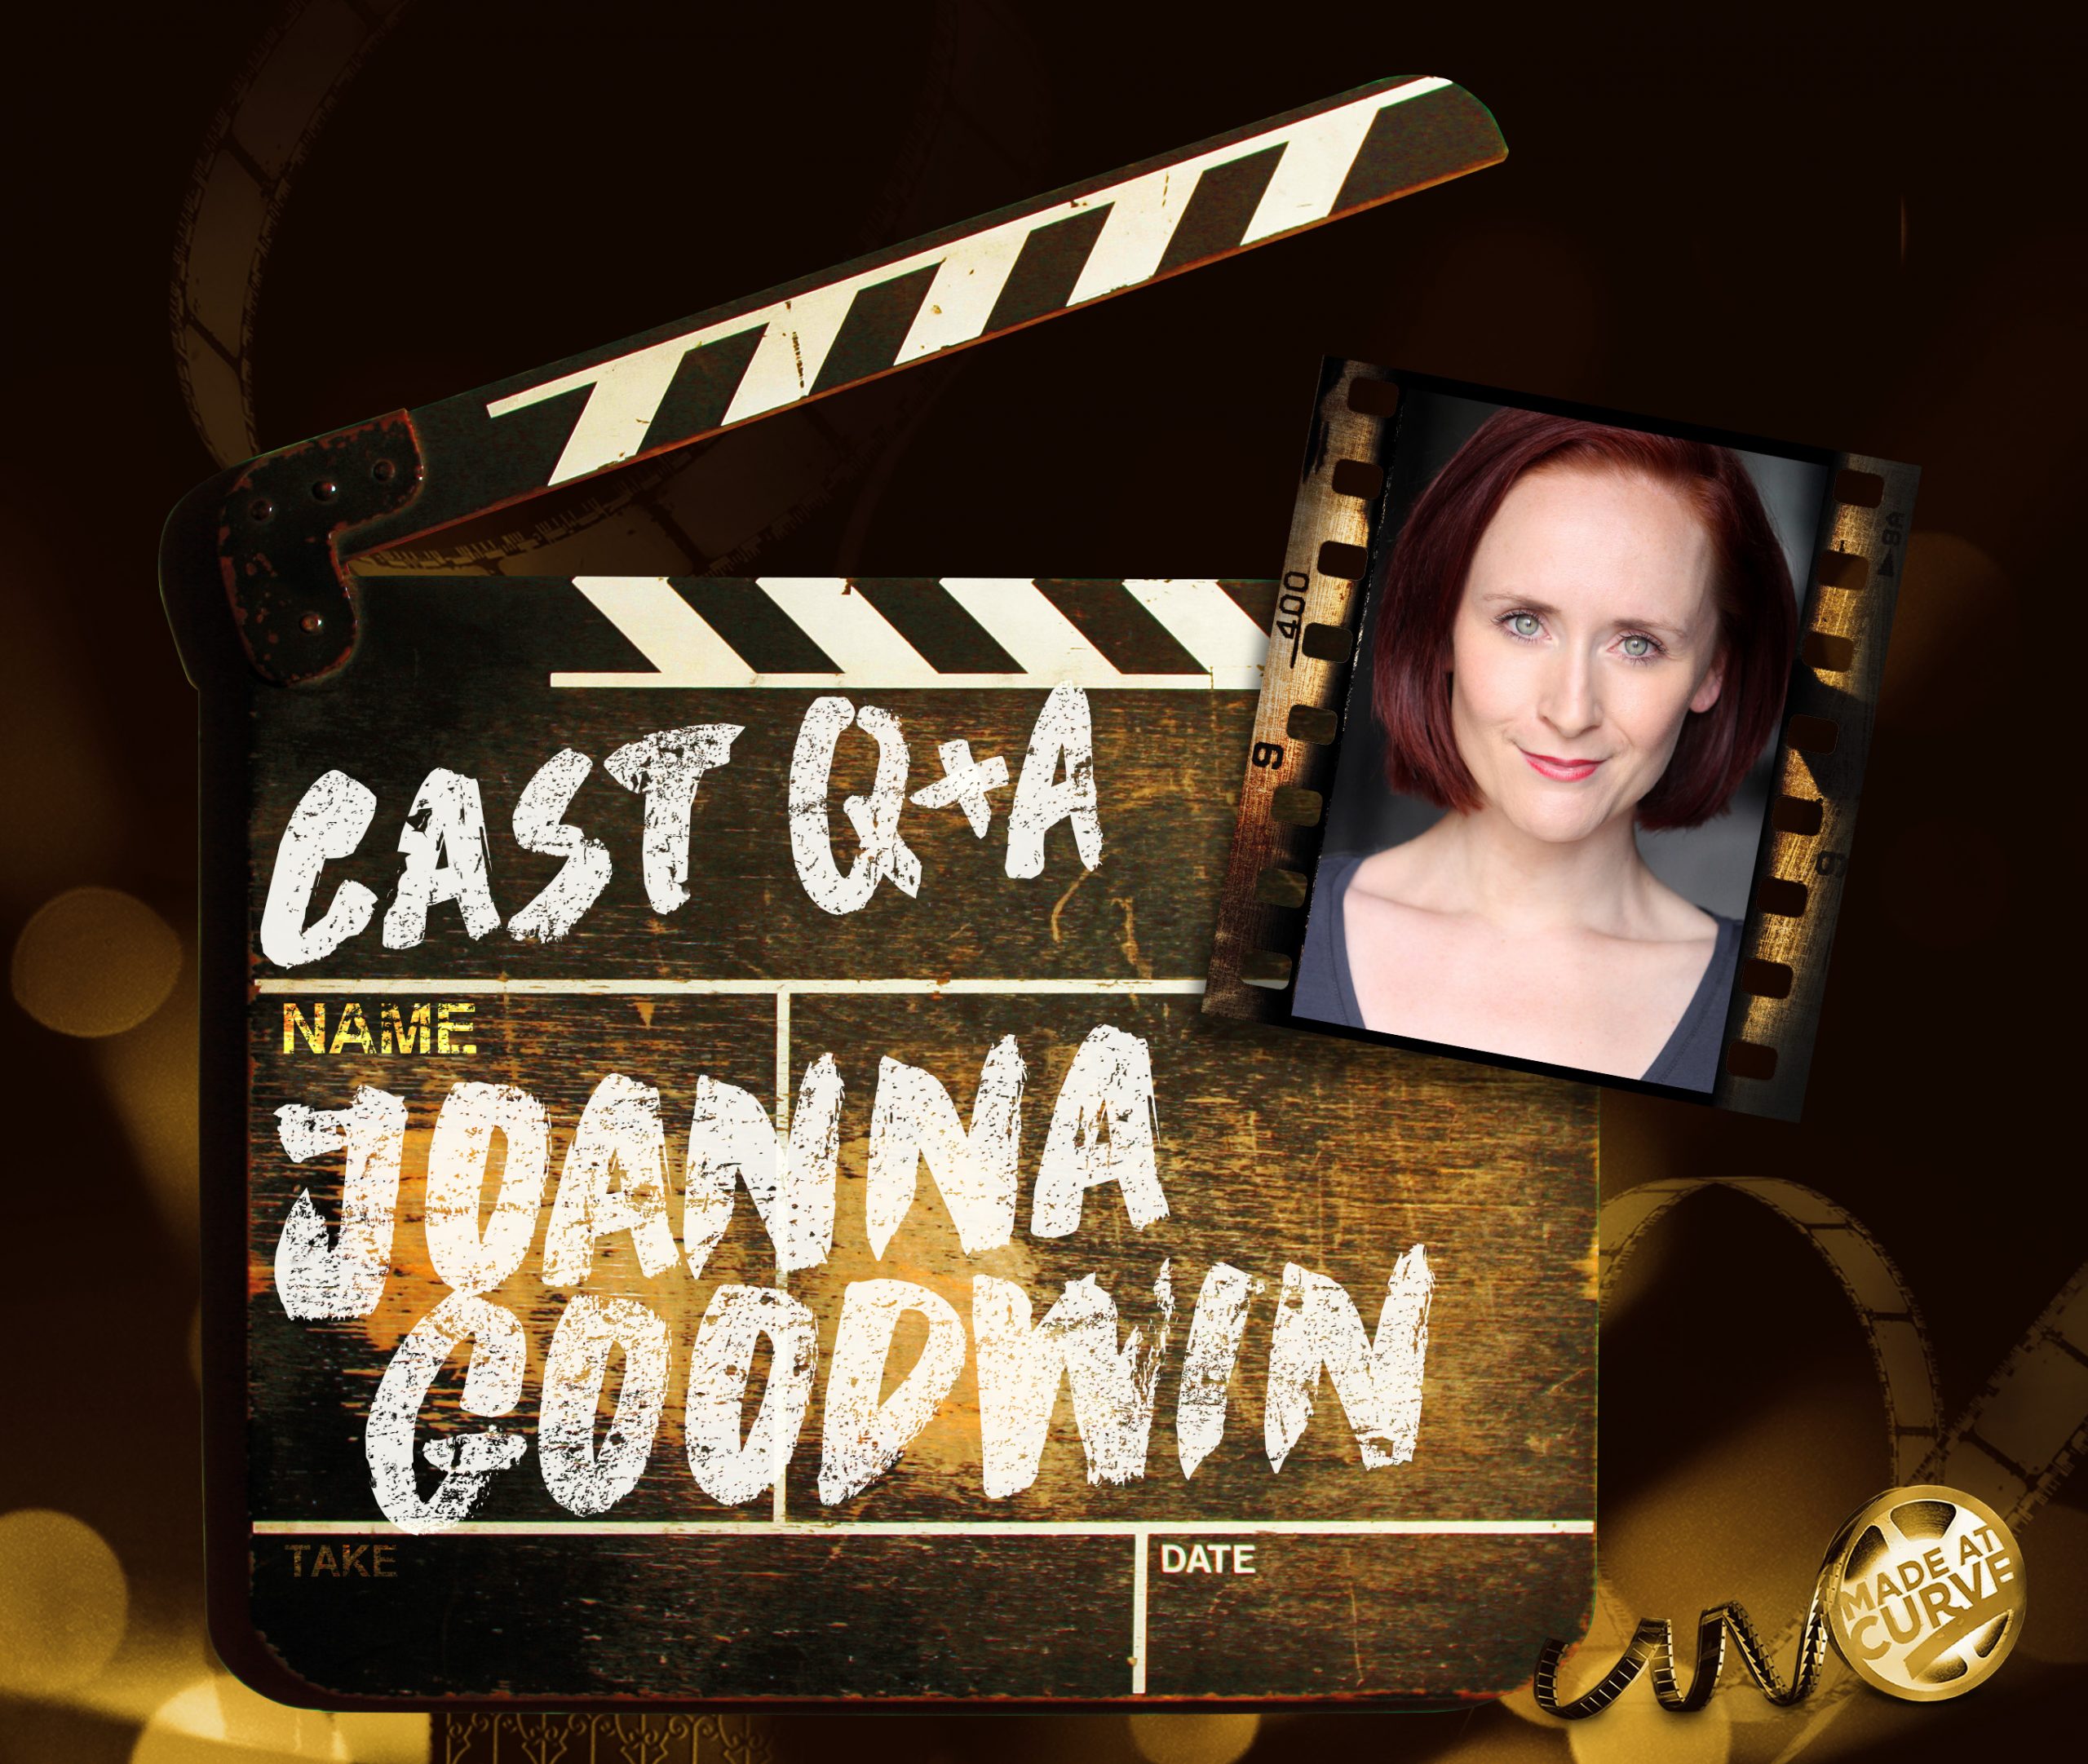 Promotional artwork for our Cast Q&A series. Joanna Goodwin's headshot sits on a sepia clapperboard and background. Text: Cast Q&A, Joanna Goodwin.